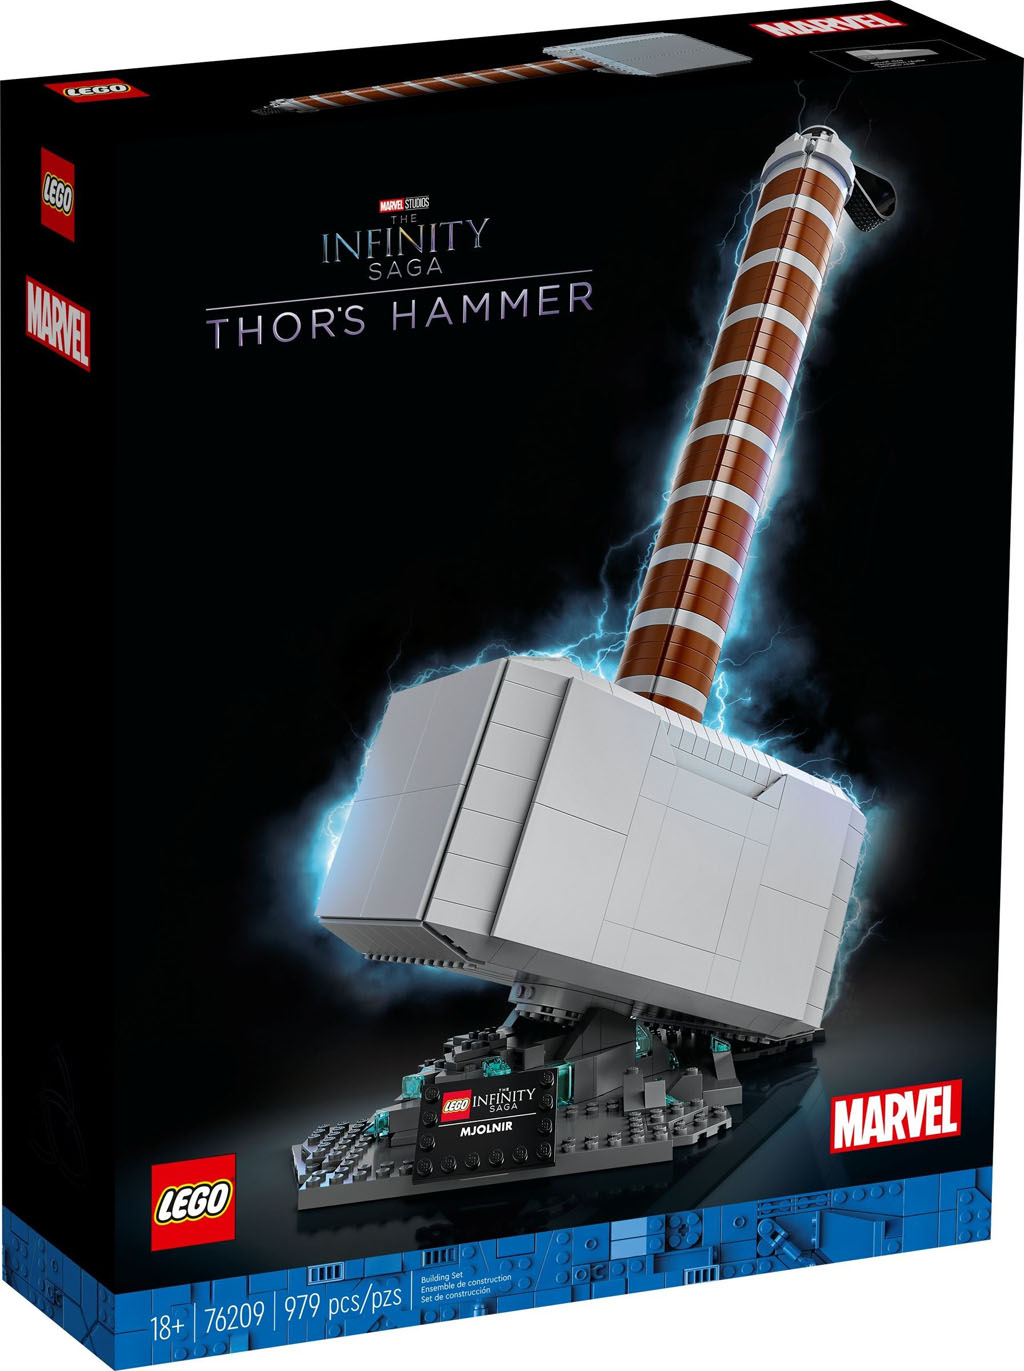 Lego Marvel Thor's Hammer review